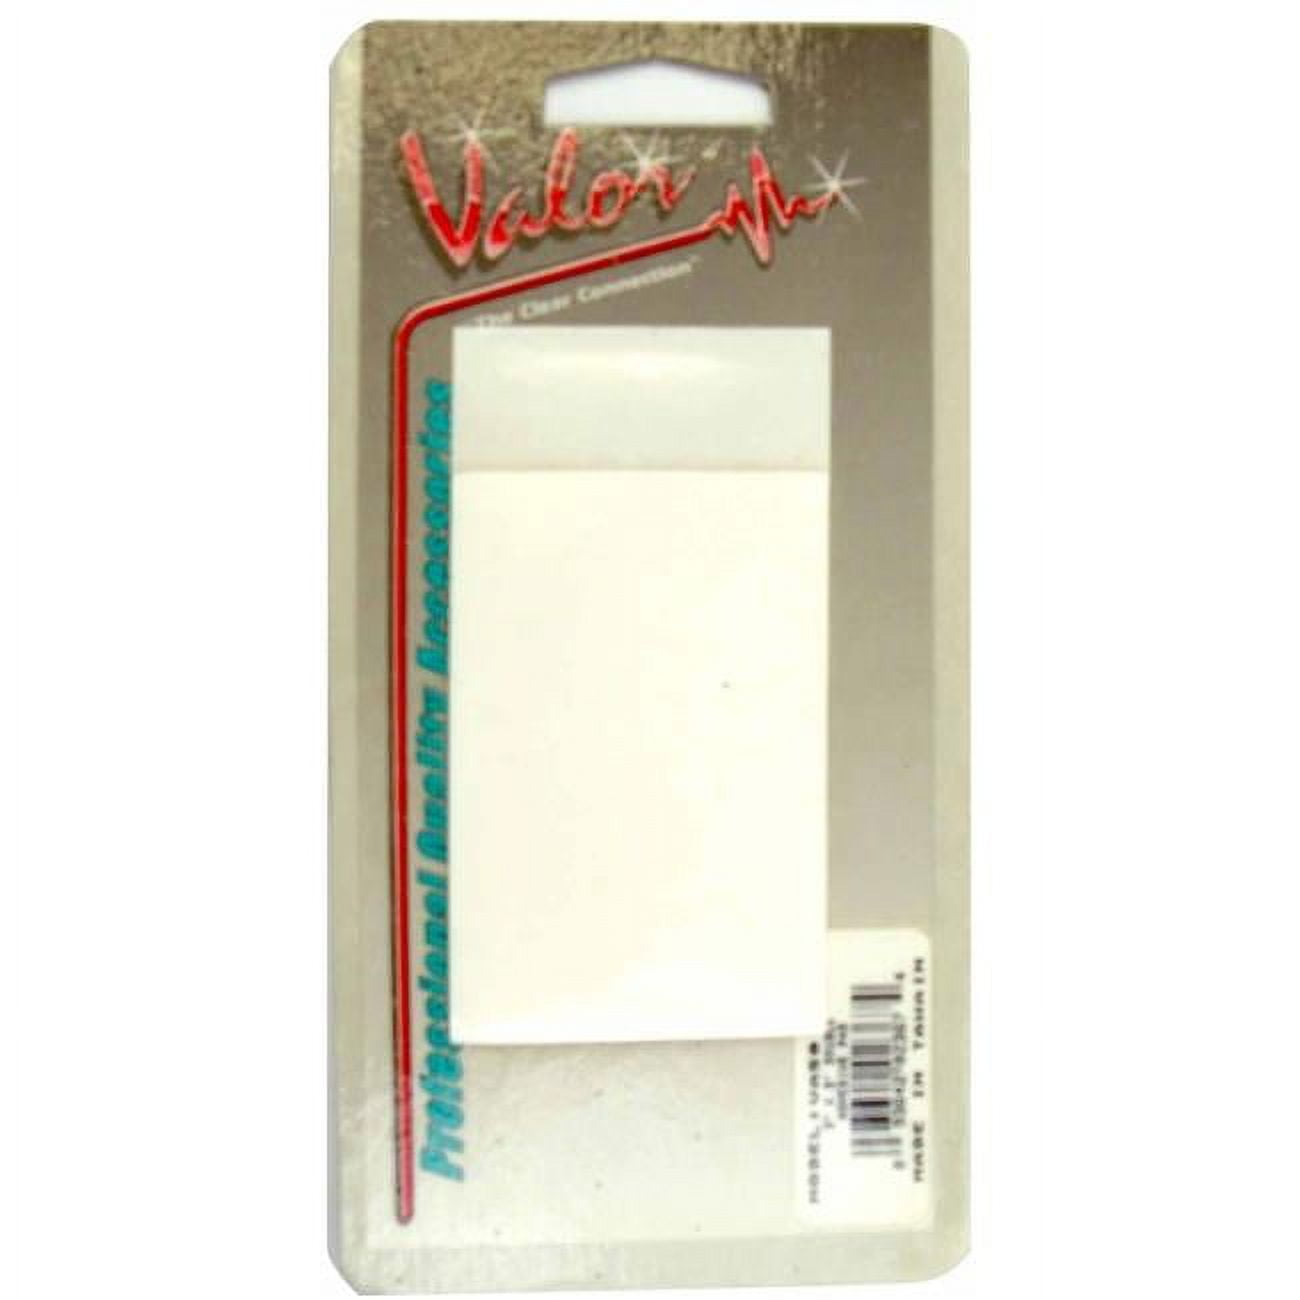 Picture of Astatic VA50 2 x 3 in. Double Adhesive Tape Pad